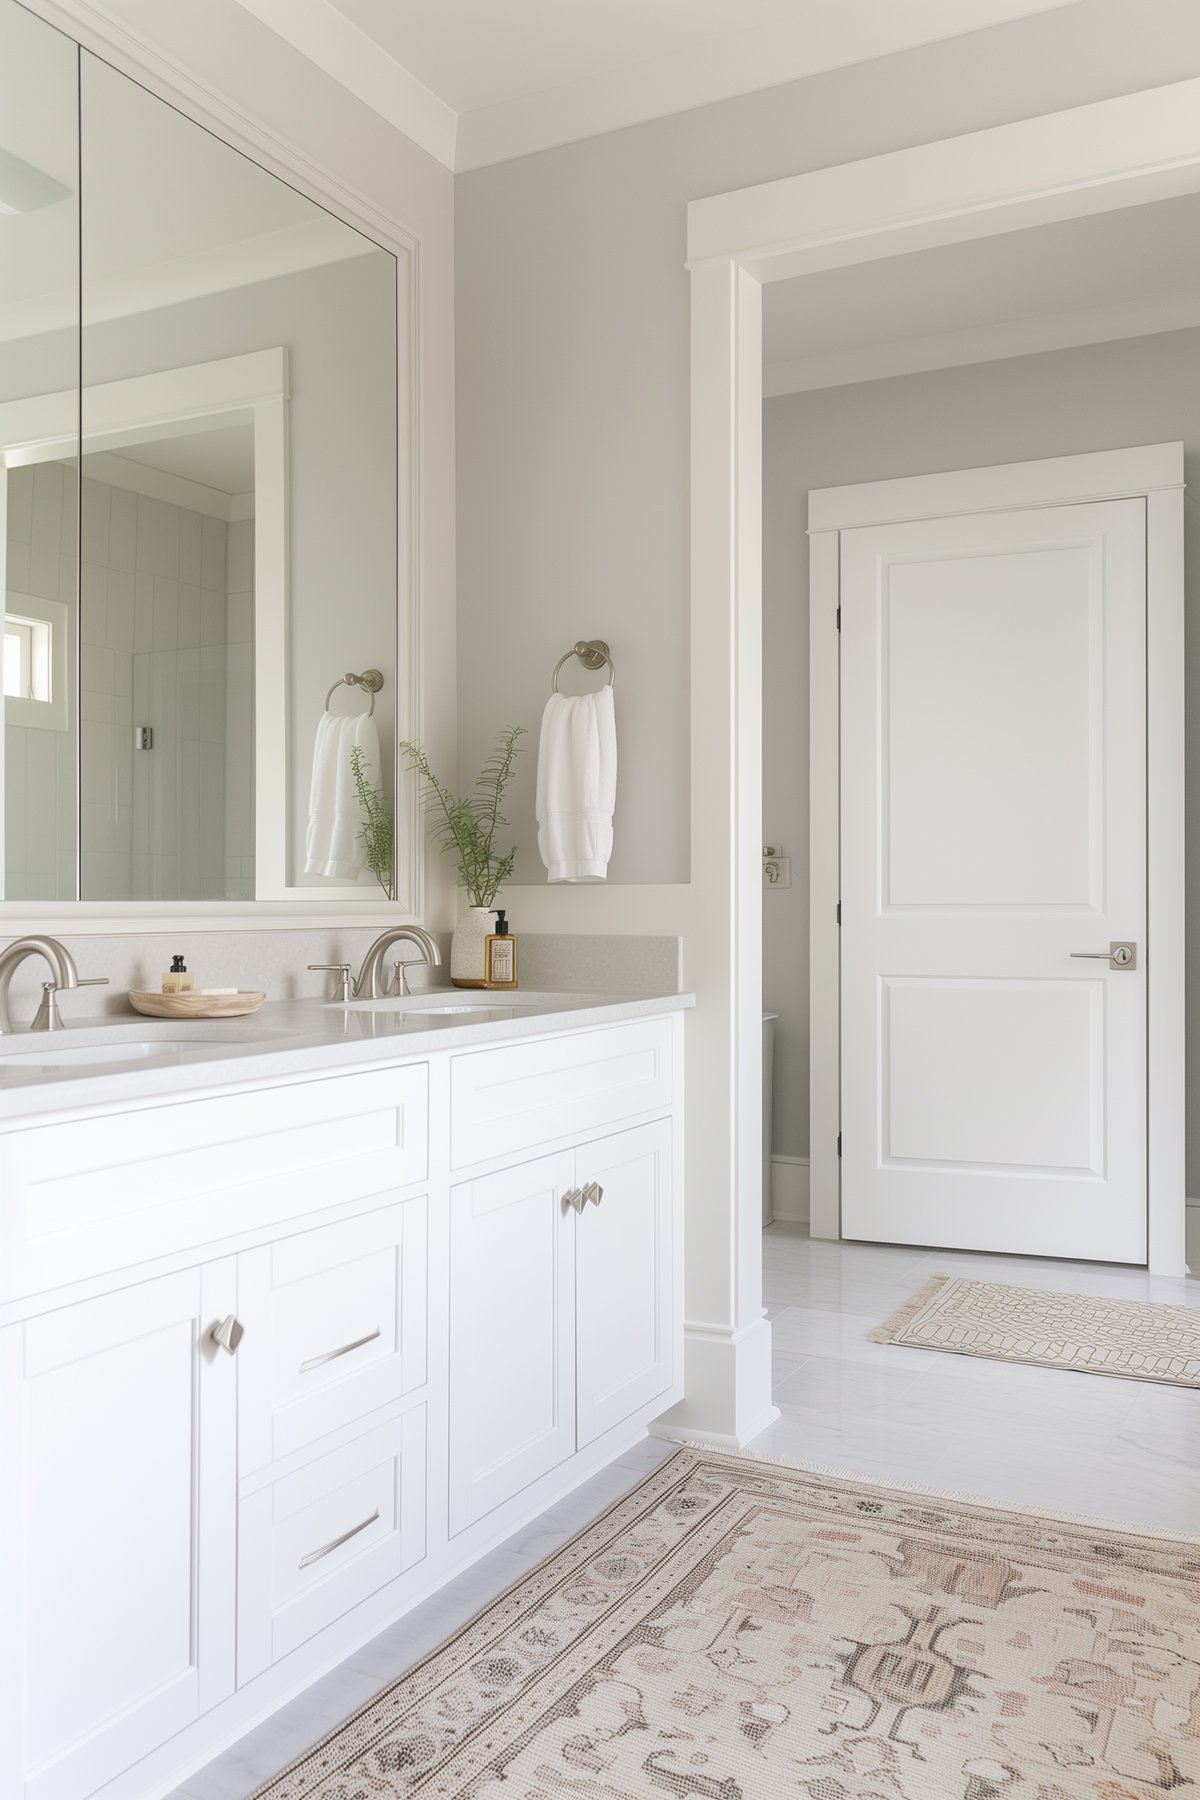 Bathroom walls painted Sherwin Williams Drift of Mist. The vanity is white with a light gray countertop and brushed nickel hardware.